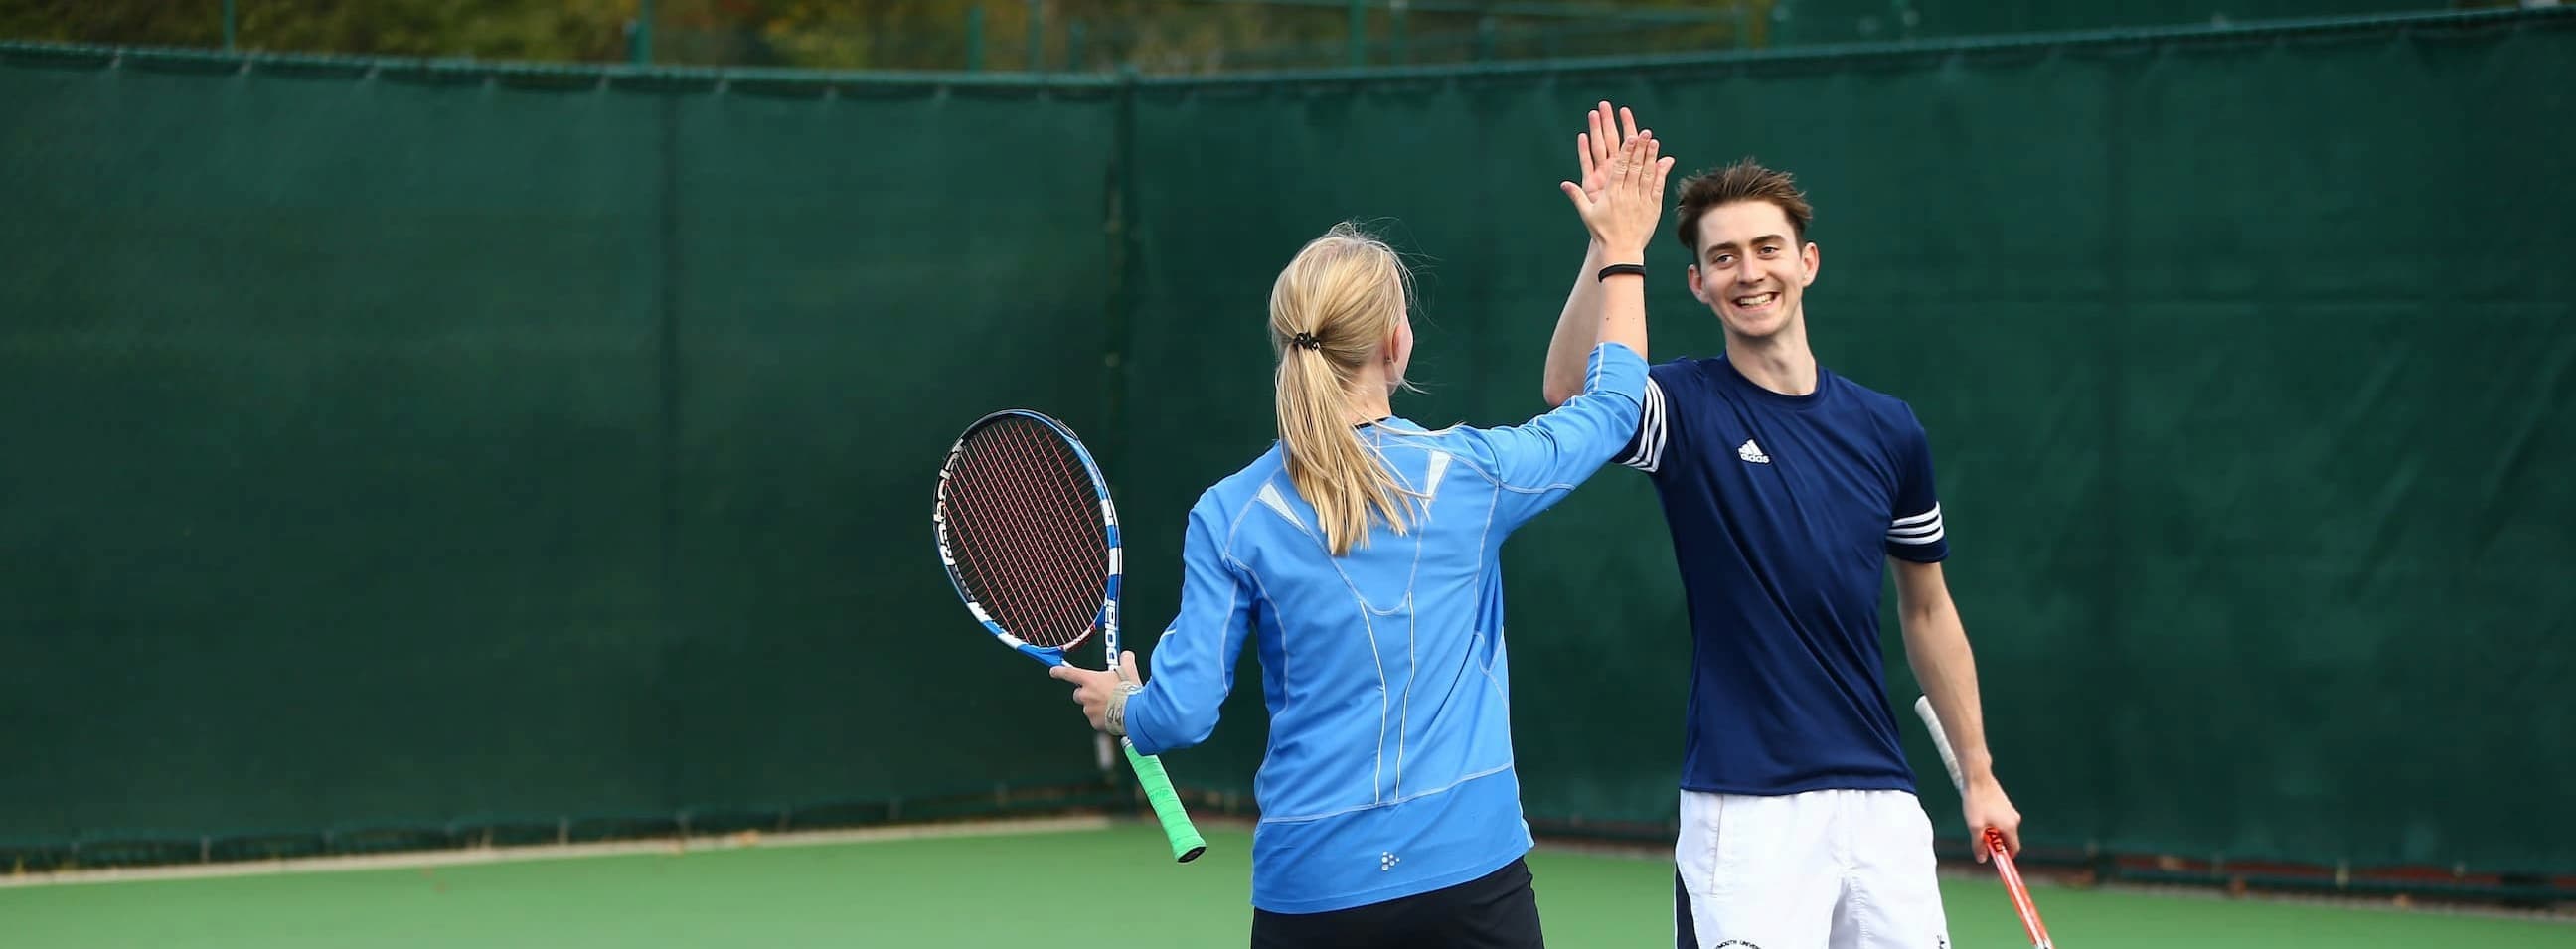 Mixed doubles partners high fiving